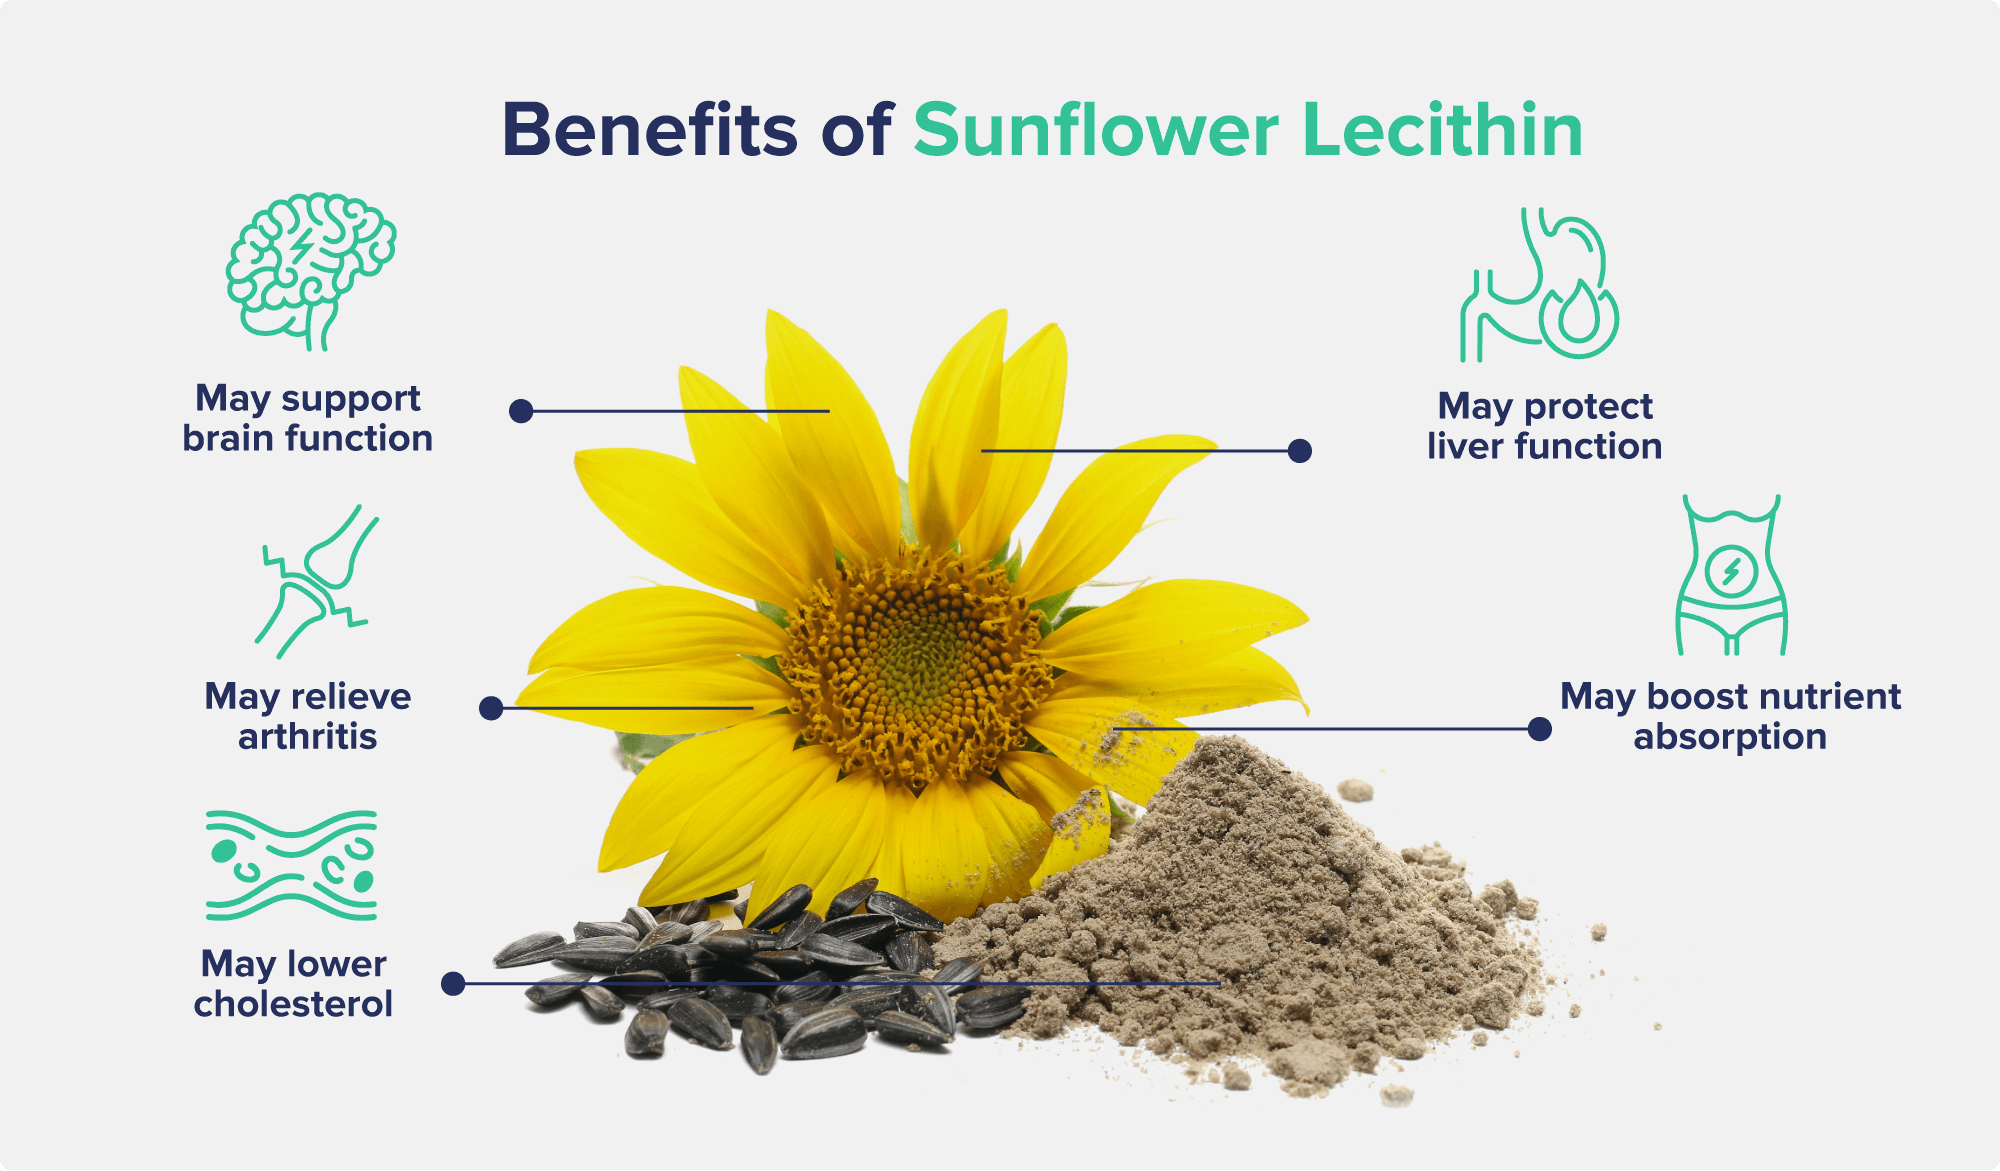 A graphic entitled Benefits of Sunflower Lecithin showing a sunflower, seeds, and a powder, with text descriptions of potential benefits surrounding the image